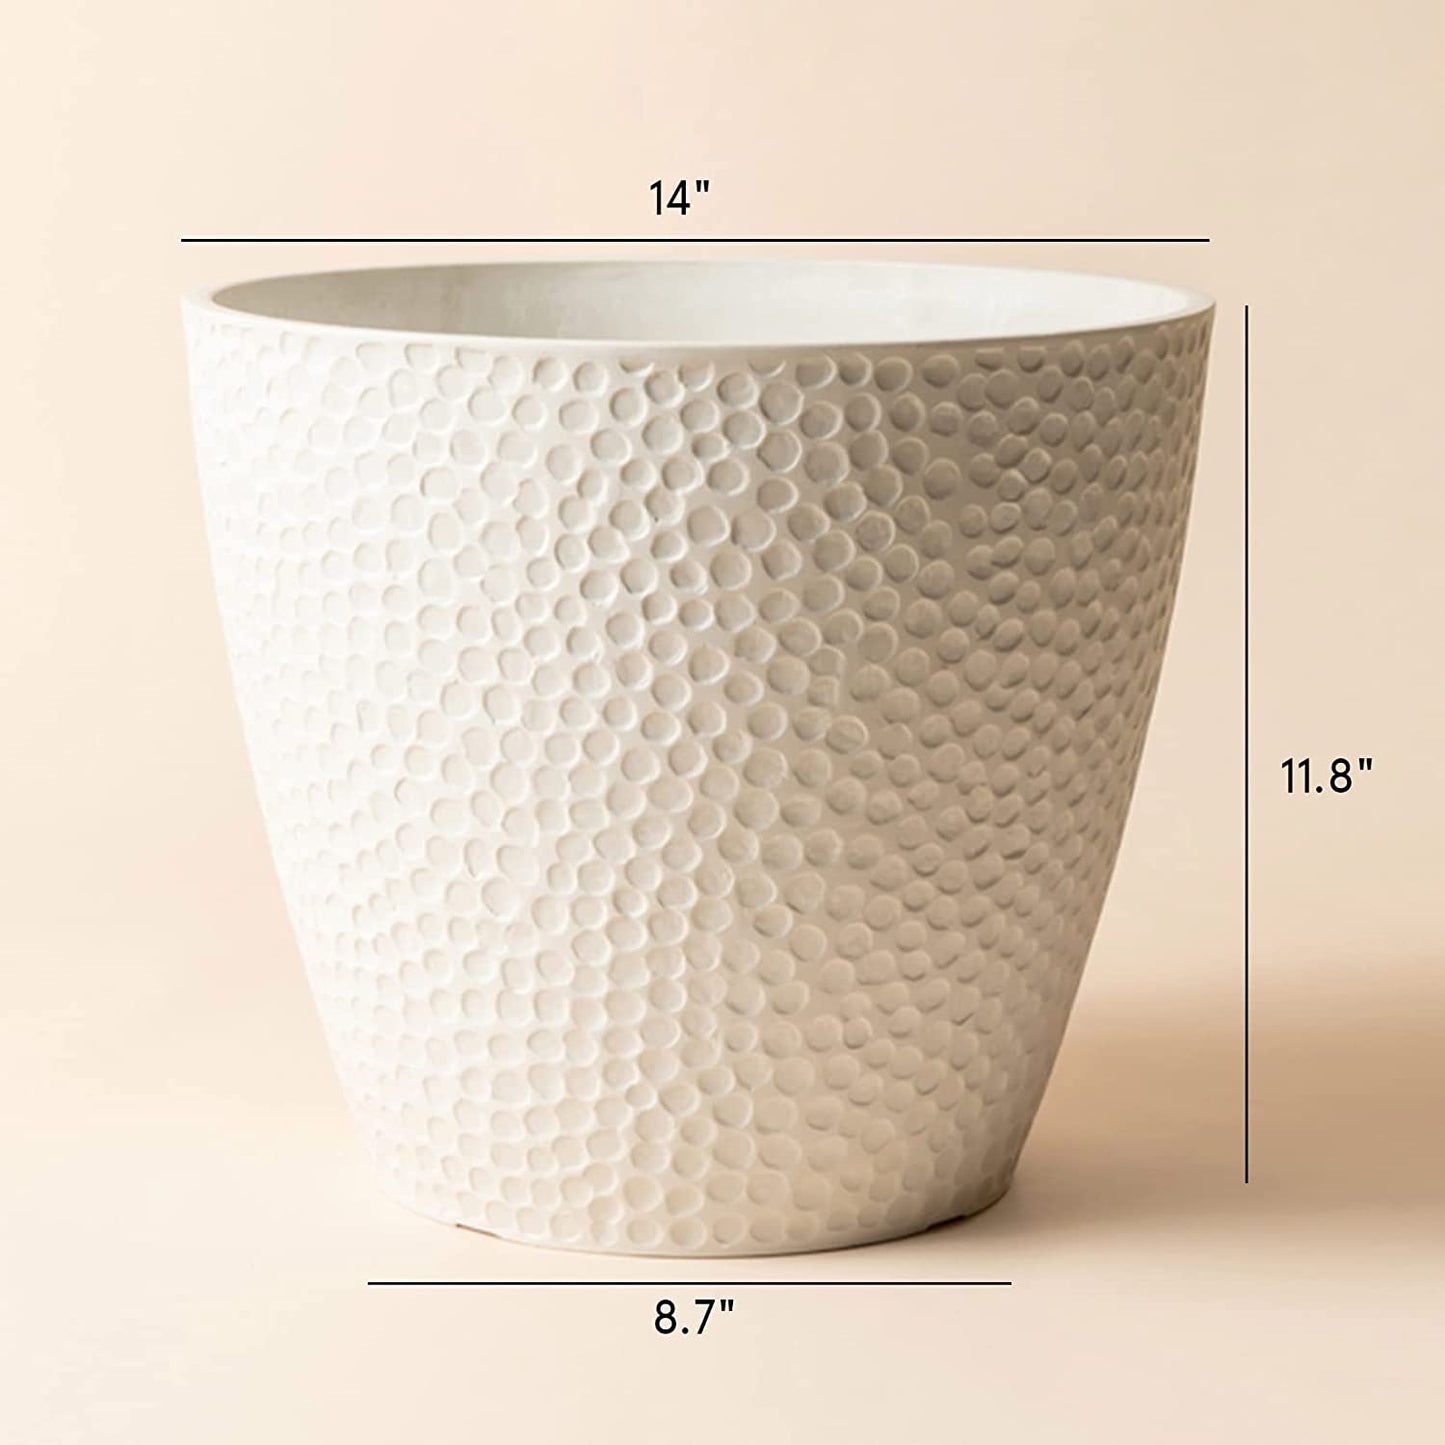 Outdoor Indoor Tree Planters - 14 Inch Large Planter Flower Pots,Modern Decorative White Plant Pot for House Plants,Honeycomb